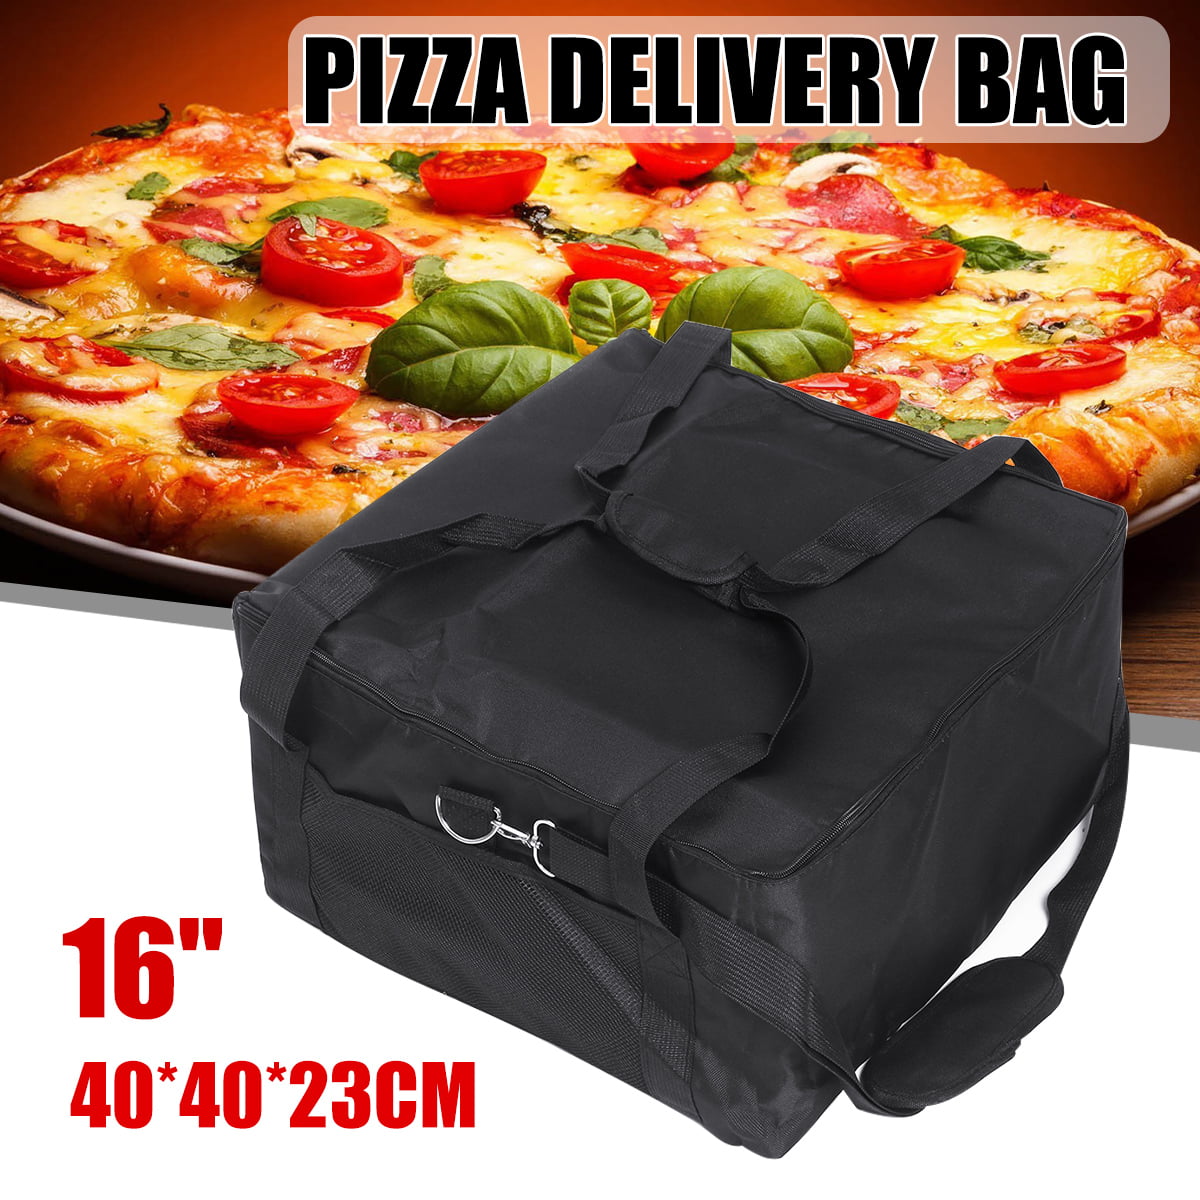 16 inch Pizza Delivery Bag Red Insulated Thermal Food Storage Holder Holds Pizza